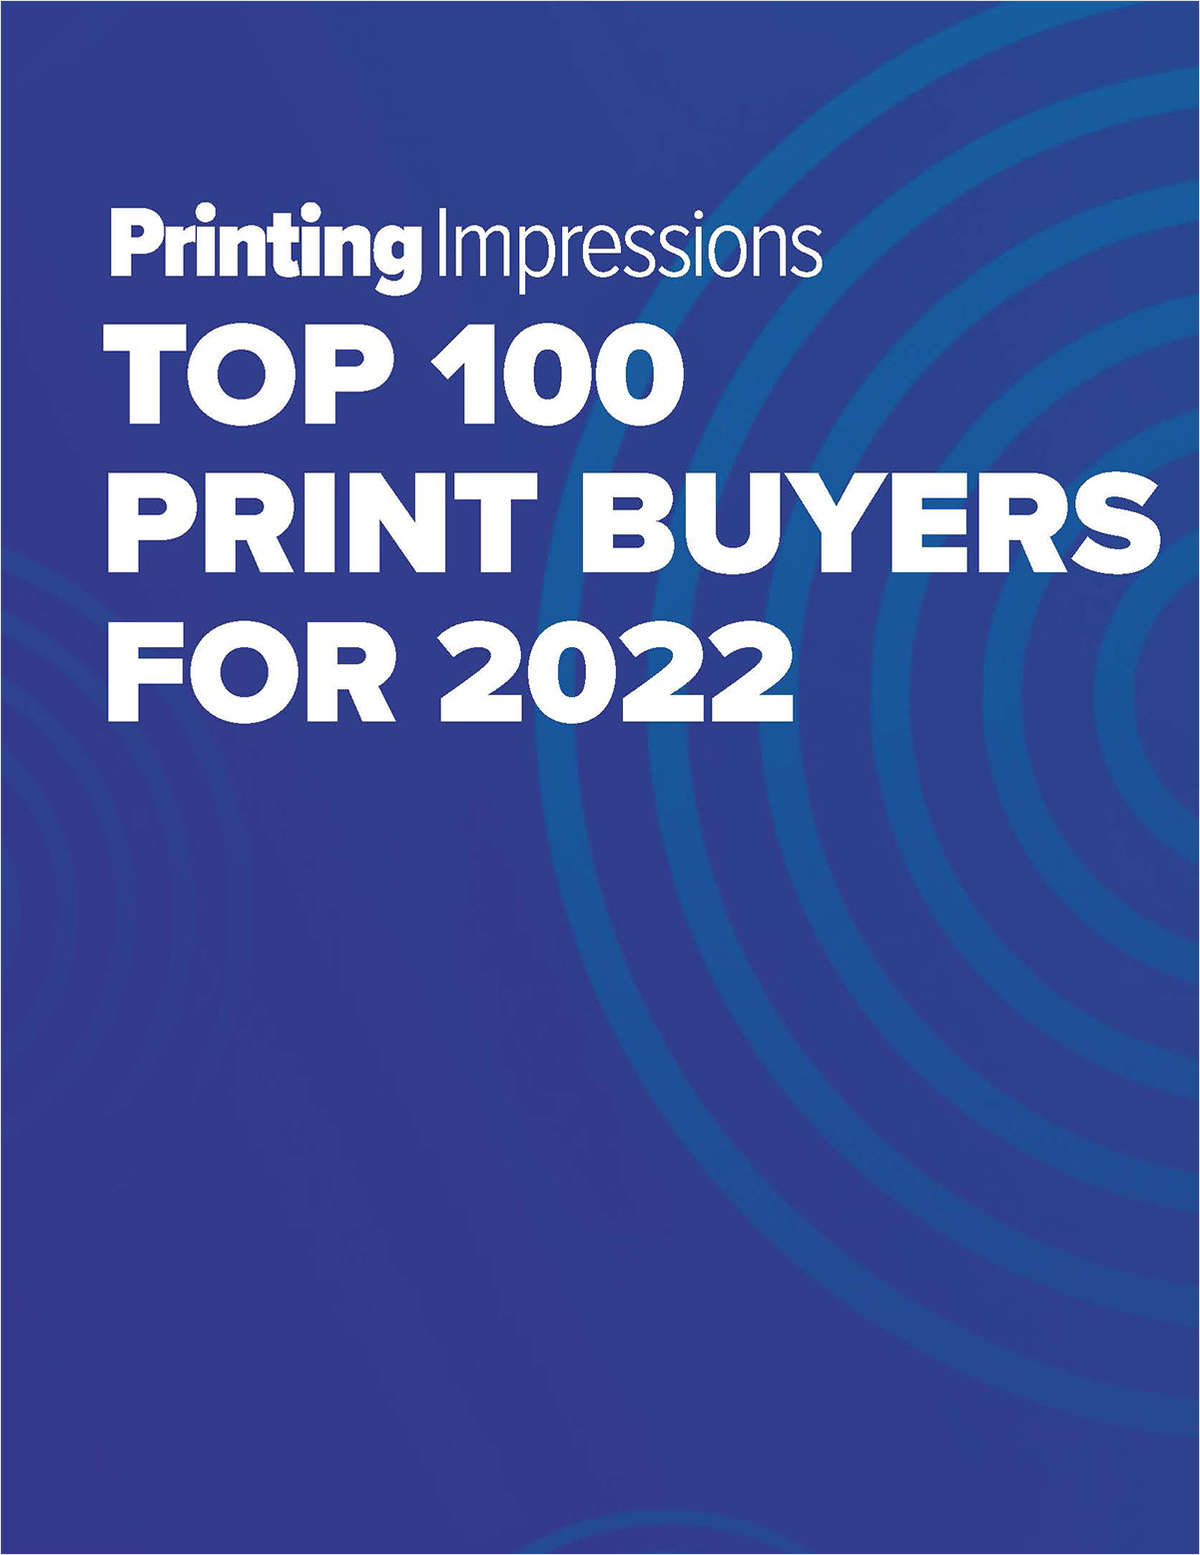 Top 100 Print Buyers Forecasted for 2022